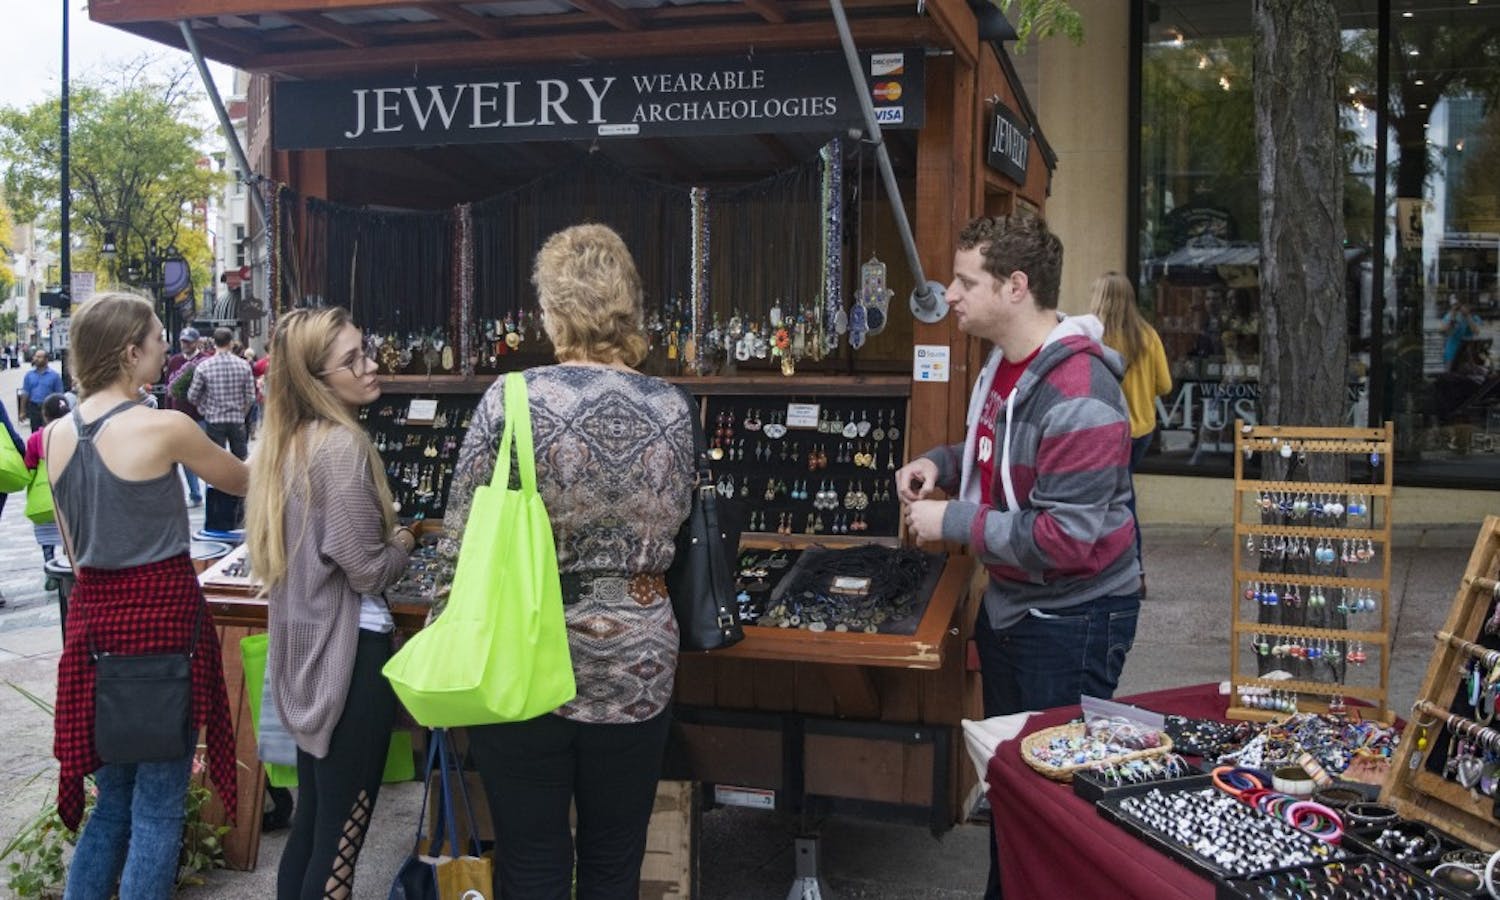 UW-Madison PhD student Jacob Hellman attempts to sell jewelry to customers at his stand Wearable Archaeologies, a job he said “doesn’t feel like a job” because of his love for it.